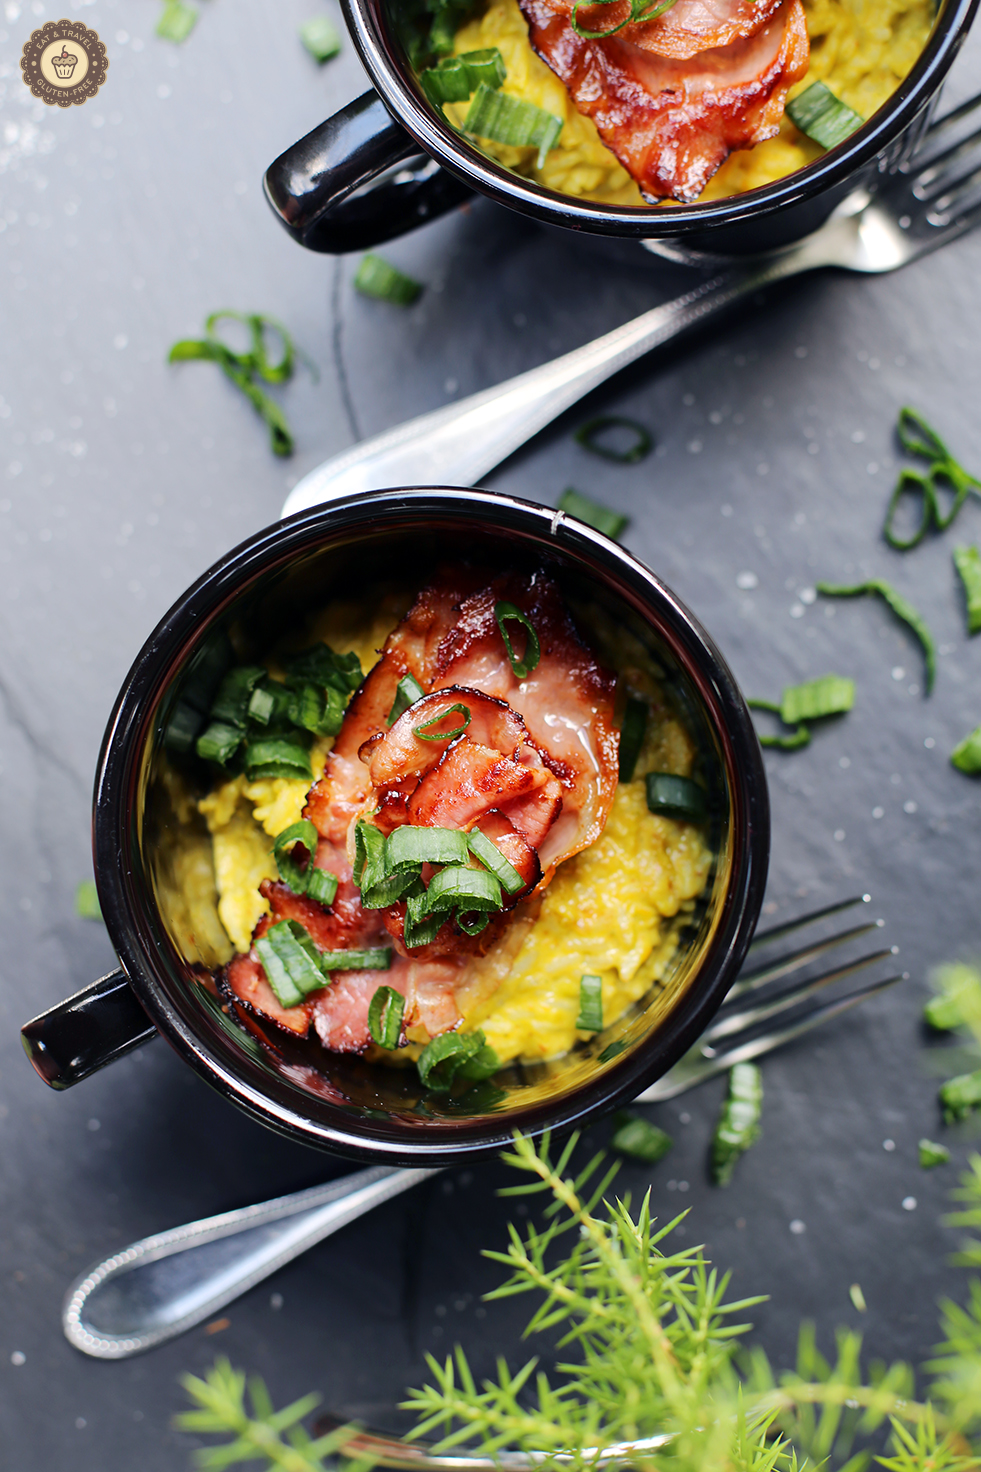 Eat & travel gluten-free | Green pea risotto with parma ham